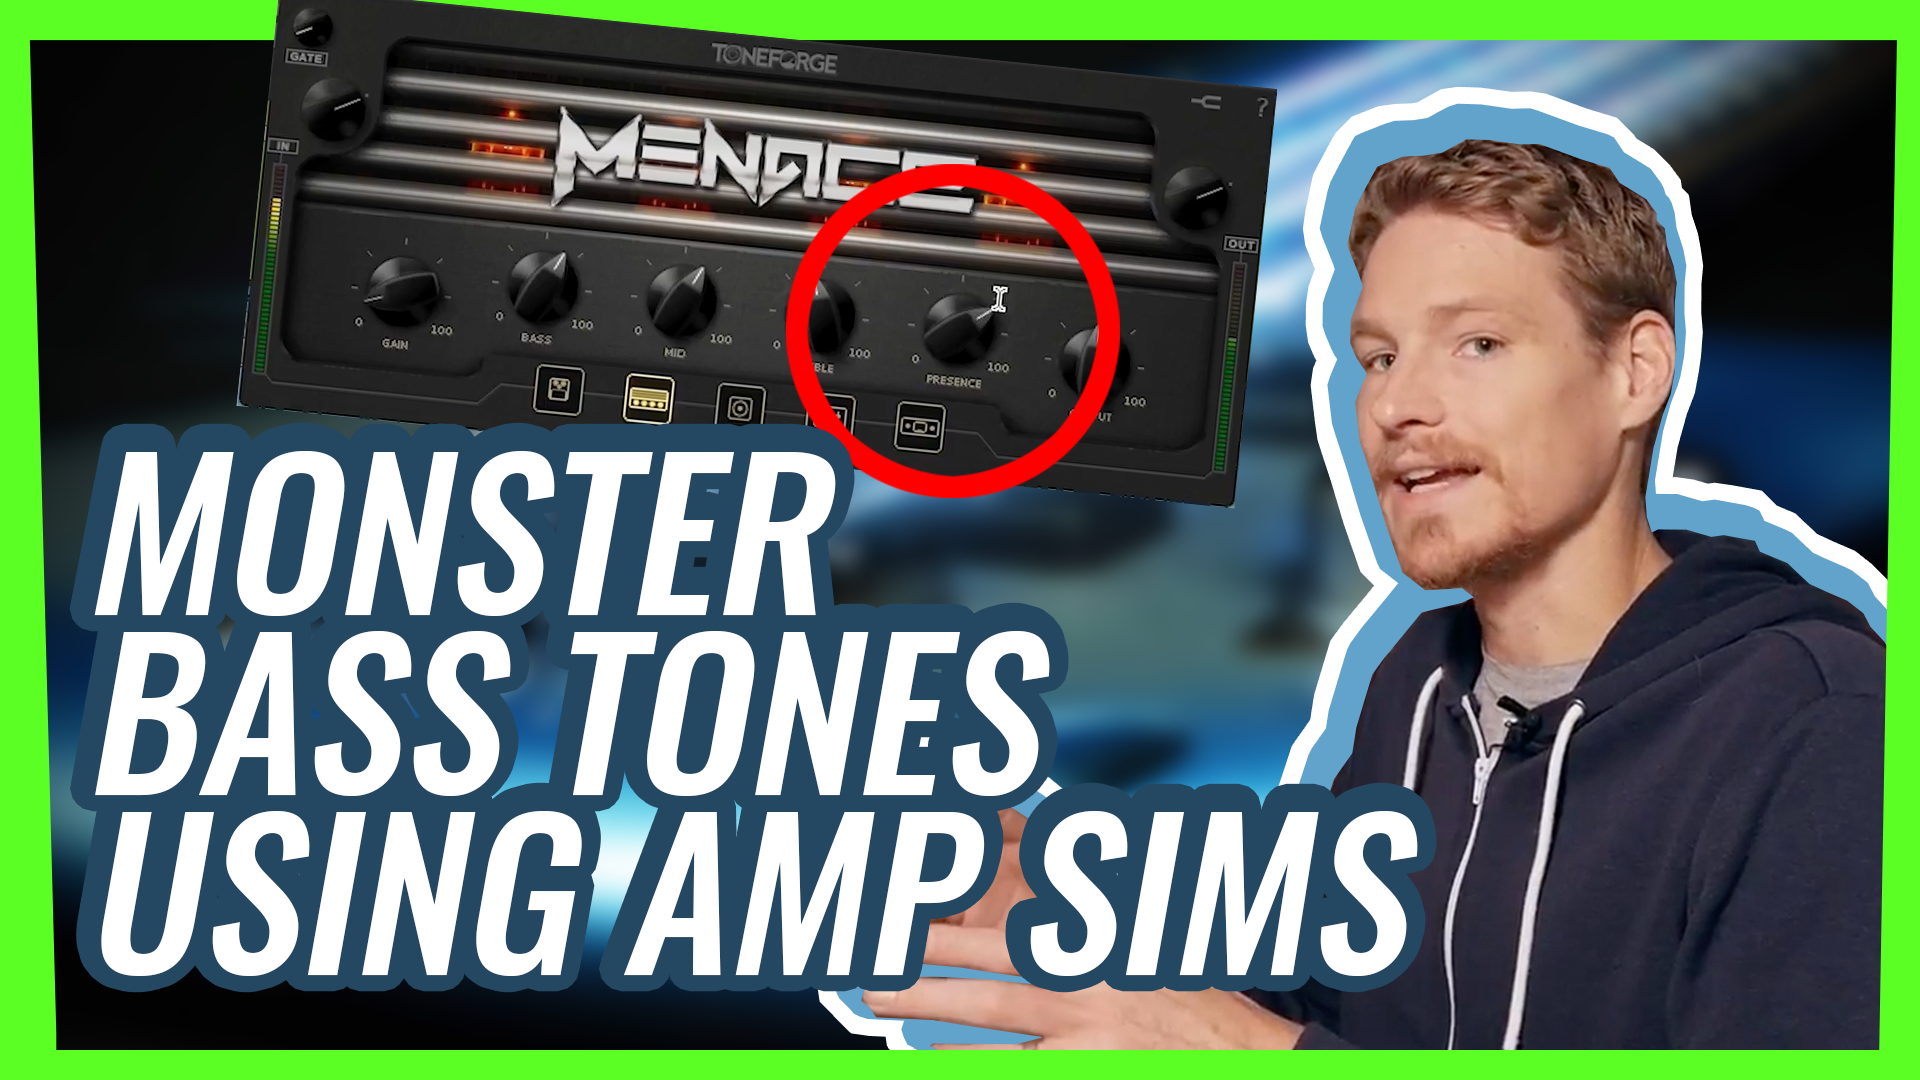 Dialing in huge metal bass tones using amp sims (w/ Forrester